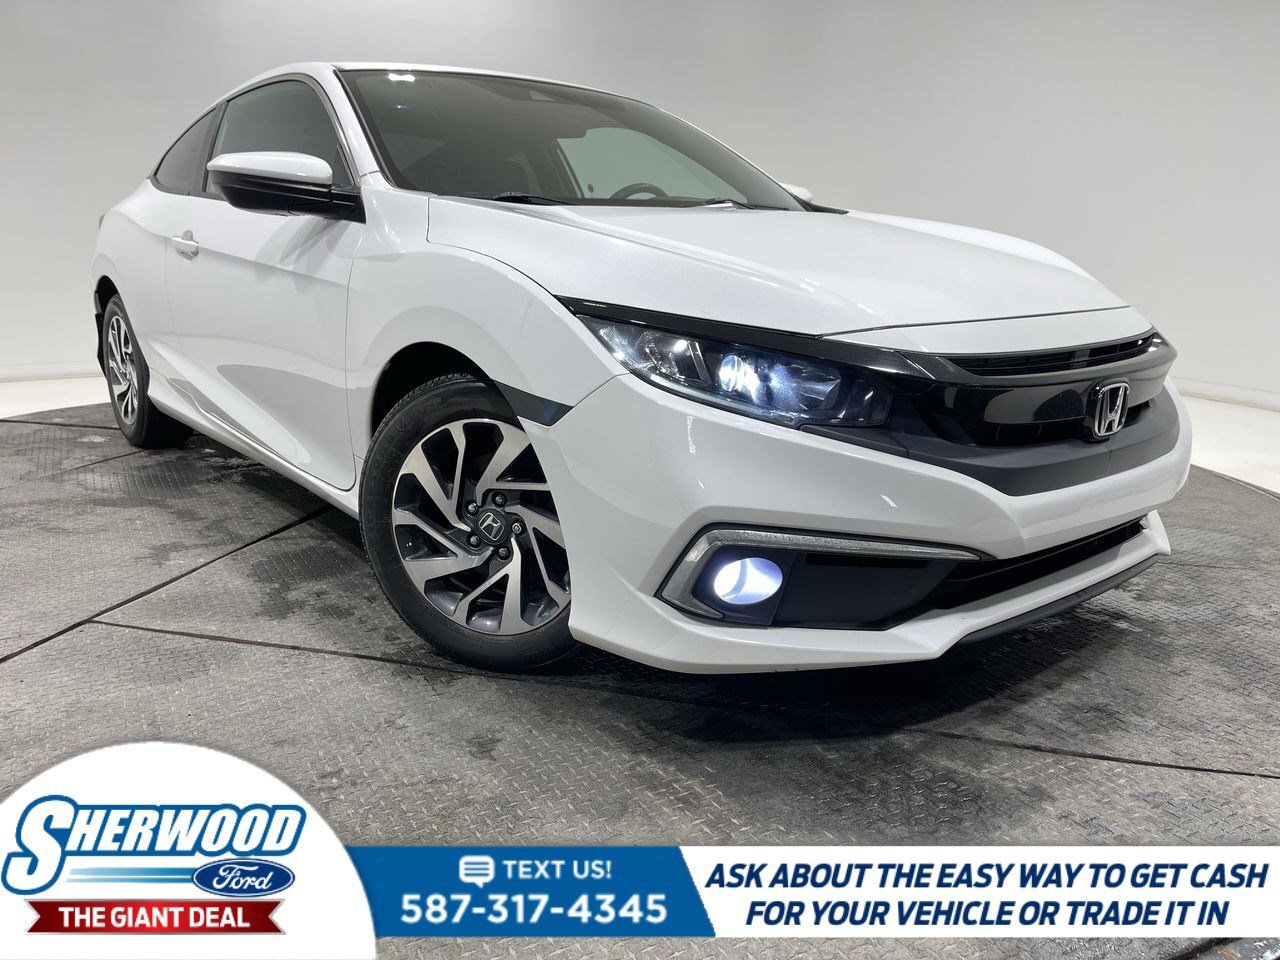 2019 Honda Civic Coupe LX- $0 Down $107 Weekly- CLEAN CARFAX